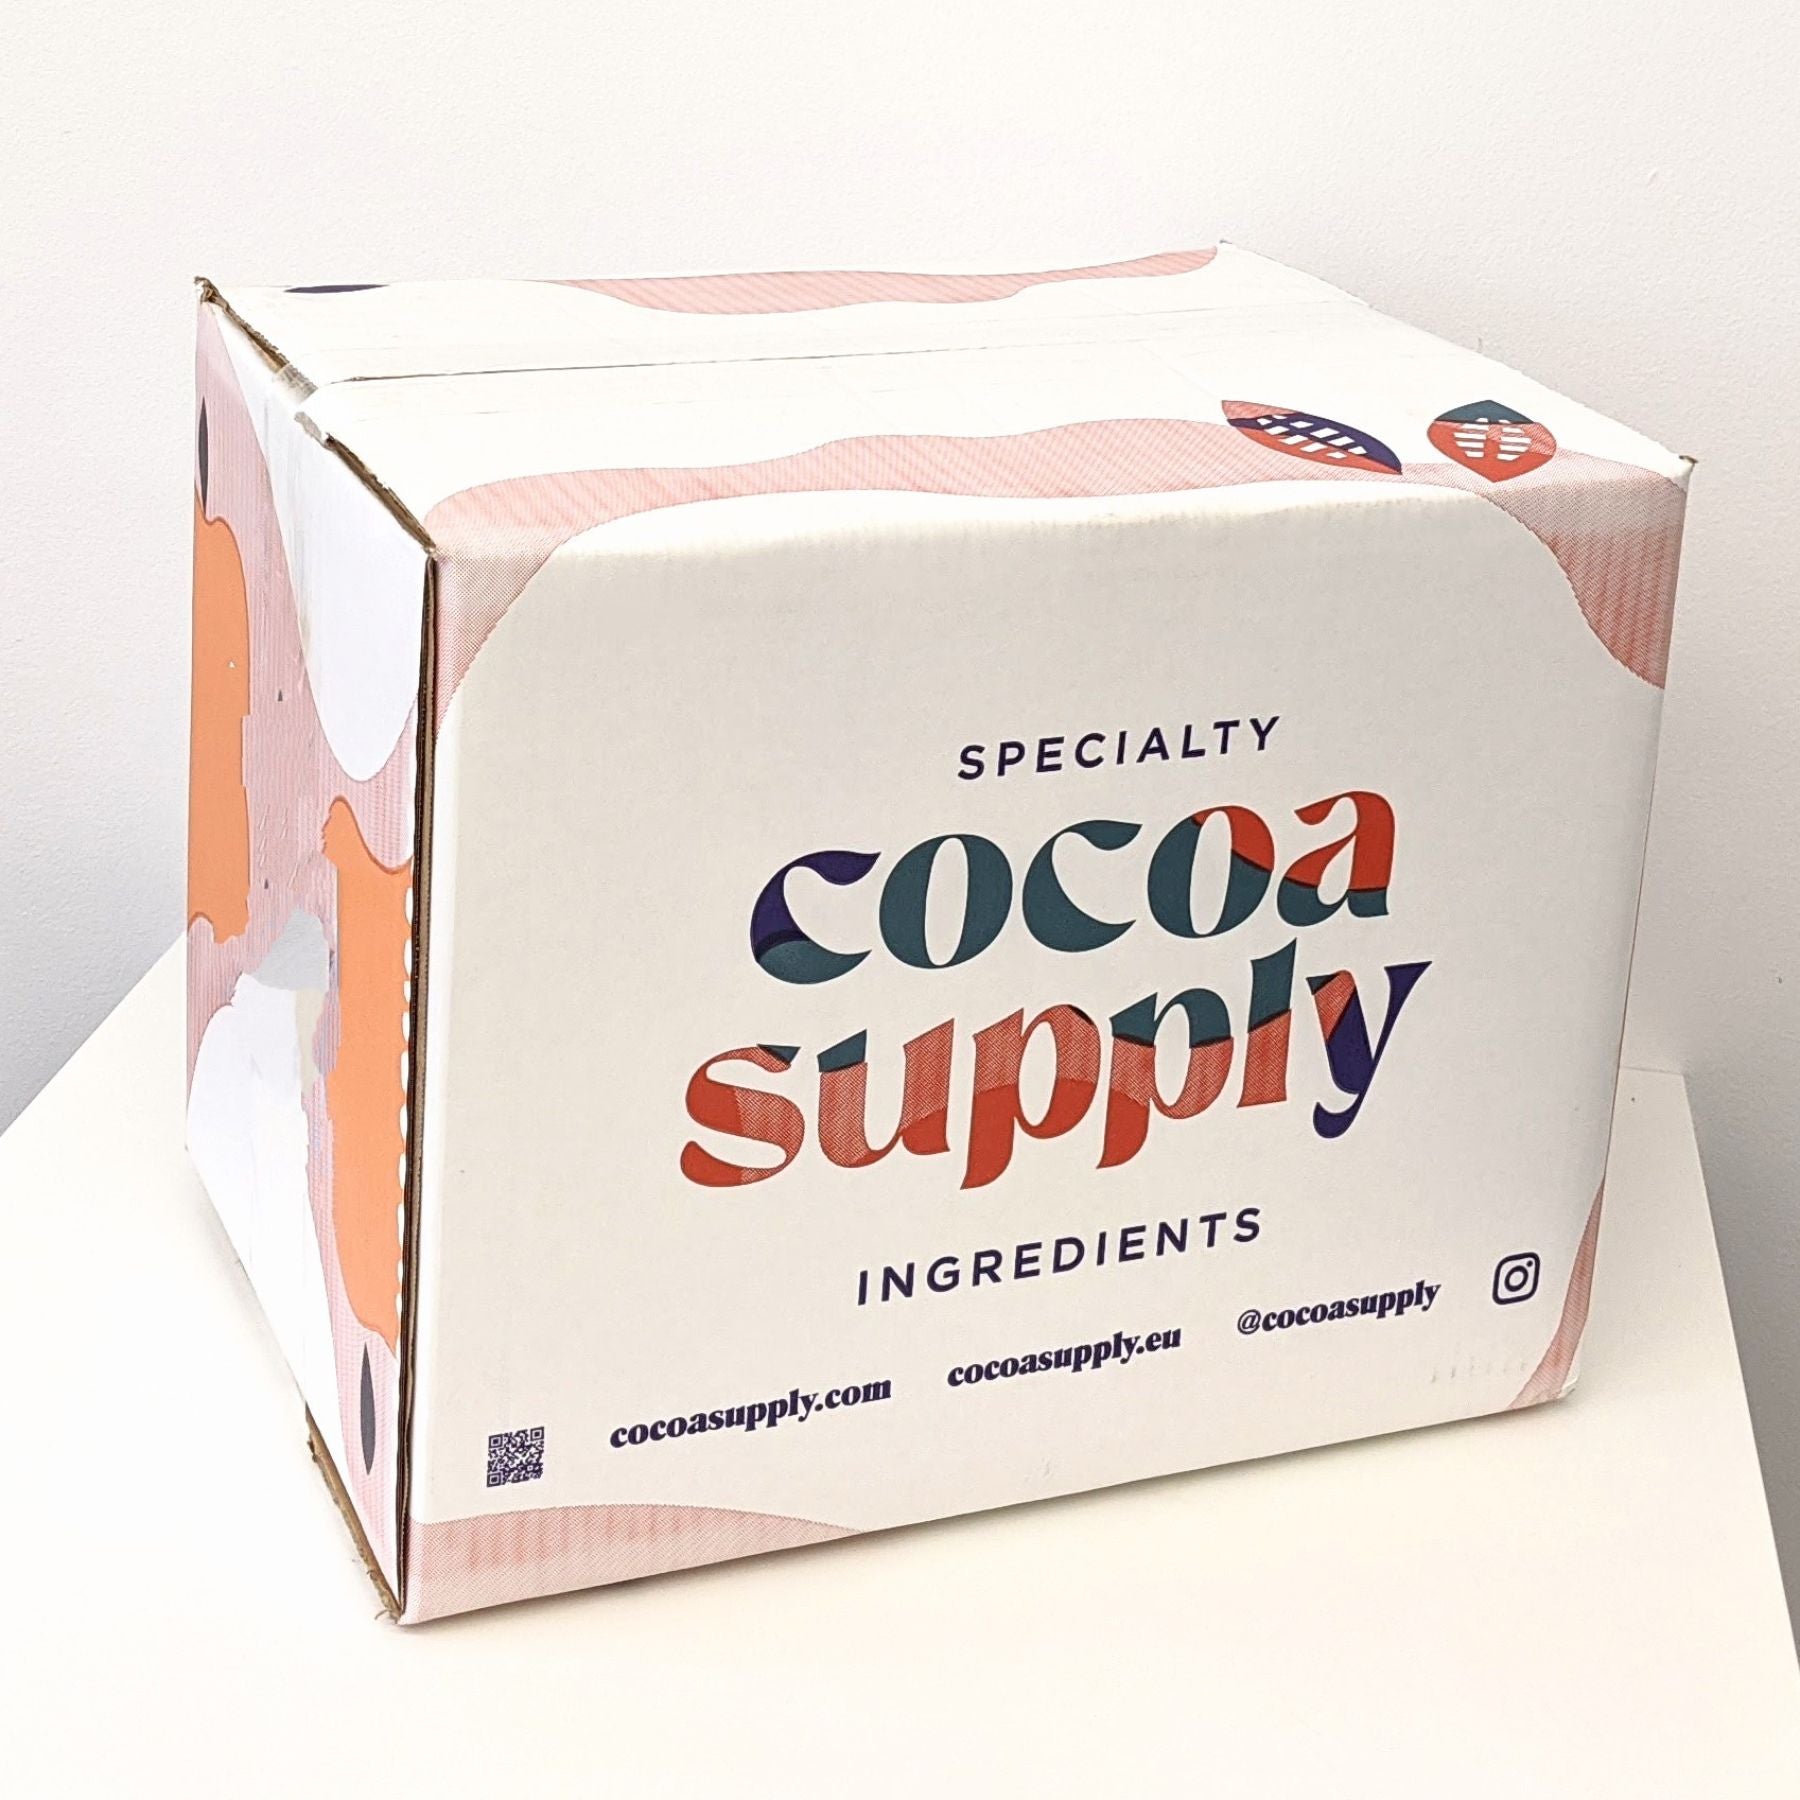 Cocoa Supply Single Origin-Made Products from Ecuador. Box used forEcuador Single Origin-Made Cacao Liquor Mass Paste.